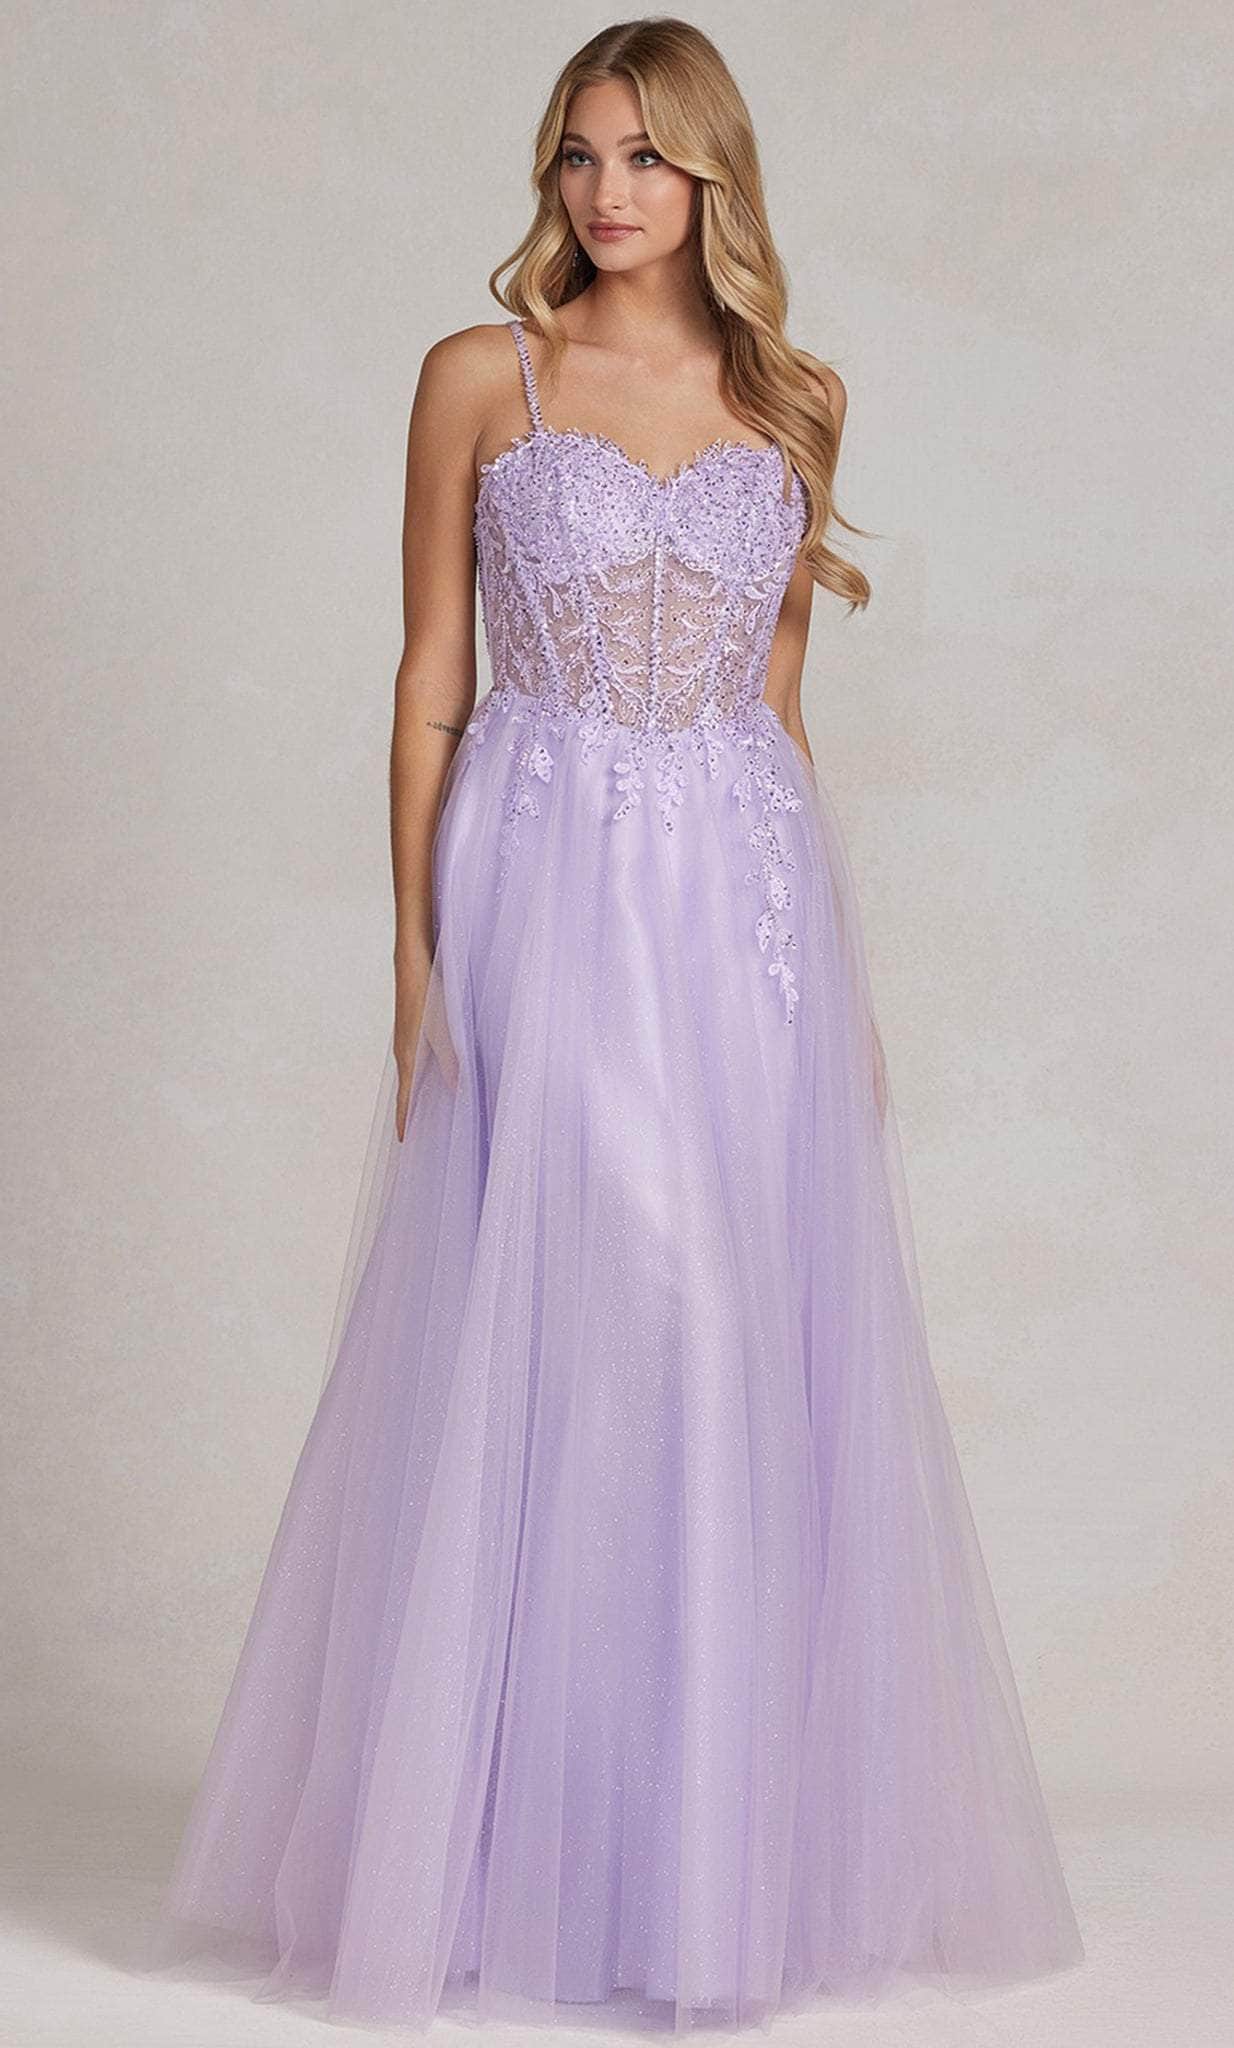 Nox Anabel F1087 - Sheer Sweetheart Prom Gown Prom Dresses